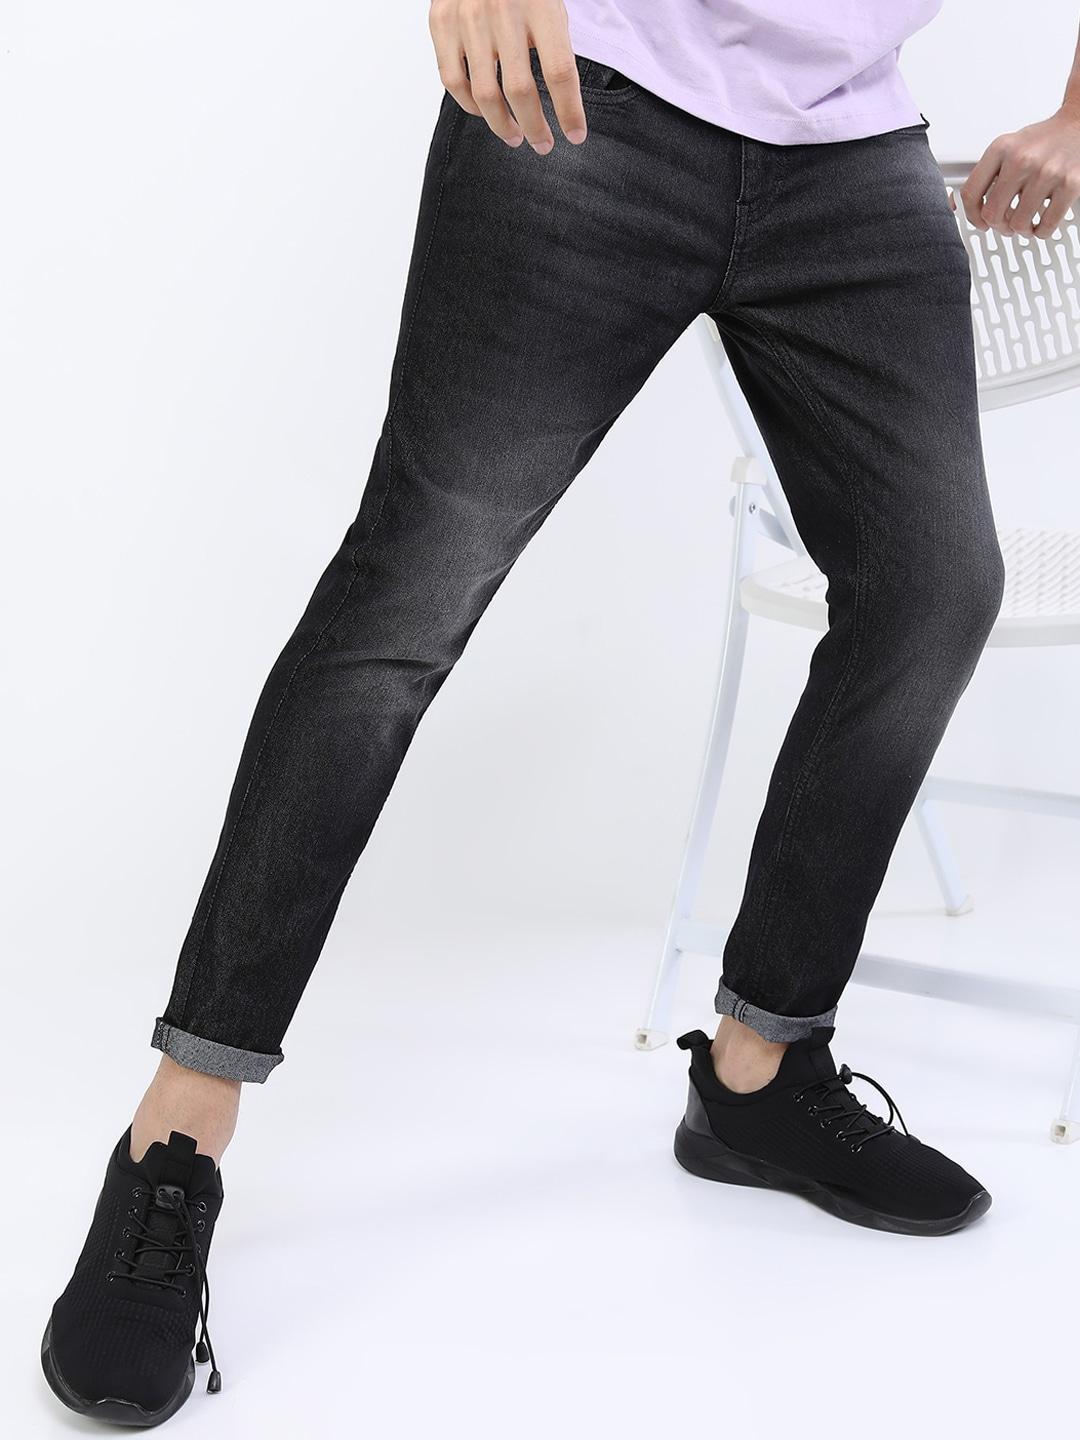 ketch-men-charcoal-skinny-fit-clean-look-stretchable-jeans